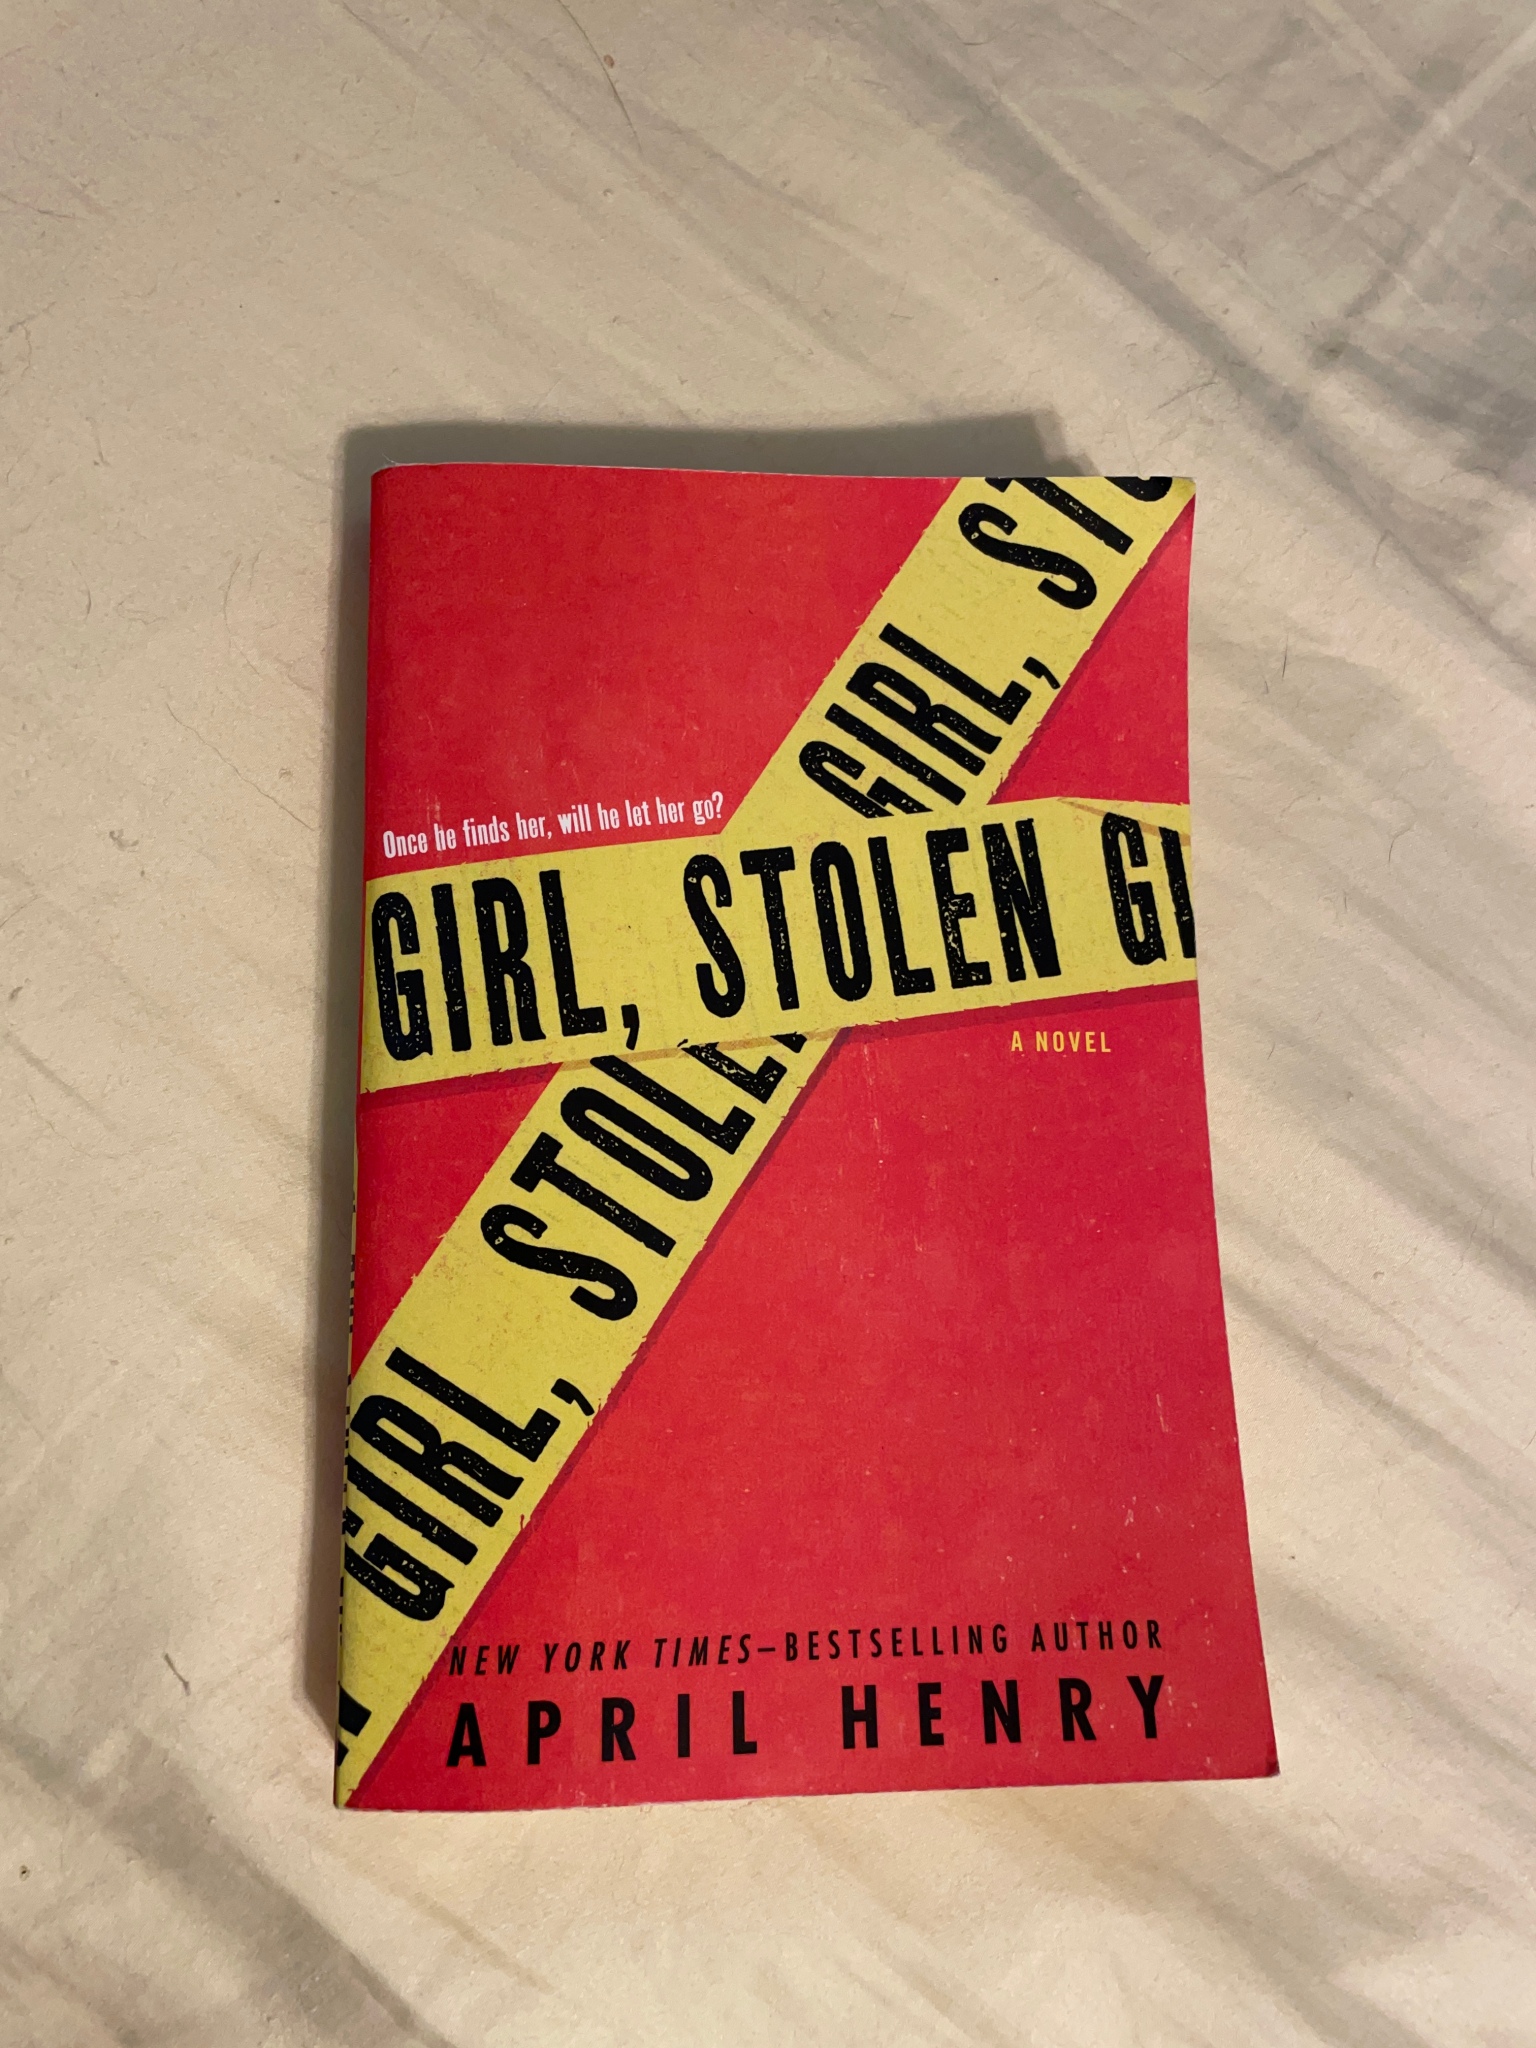 A Review of April Henry’s Girl, Stolen – Fanatic Squared